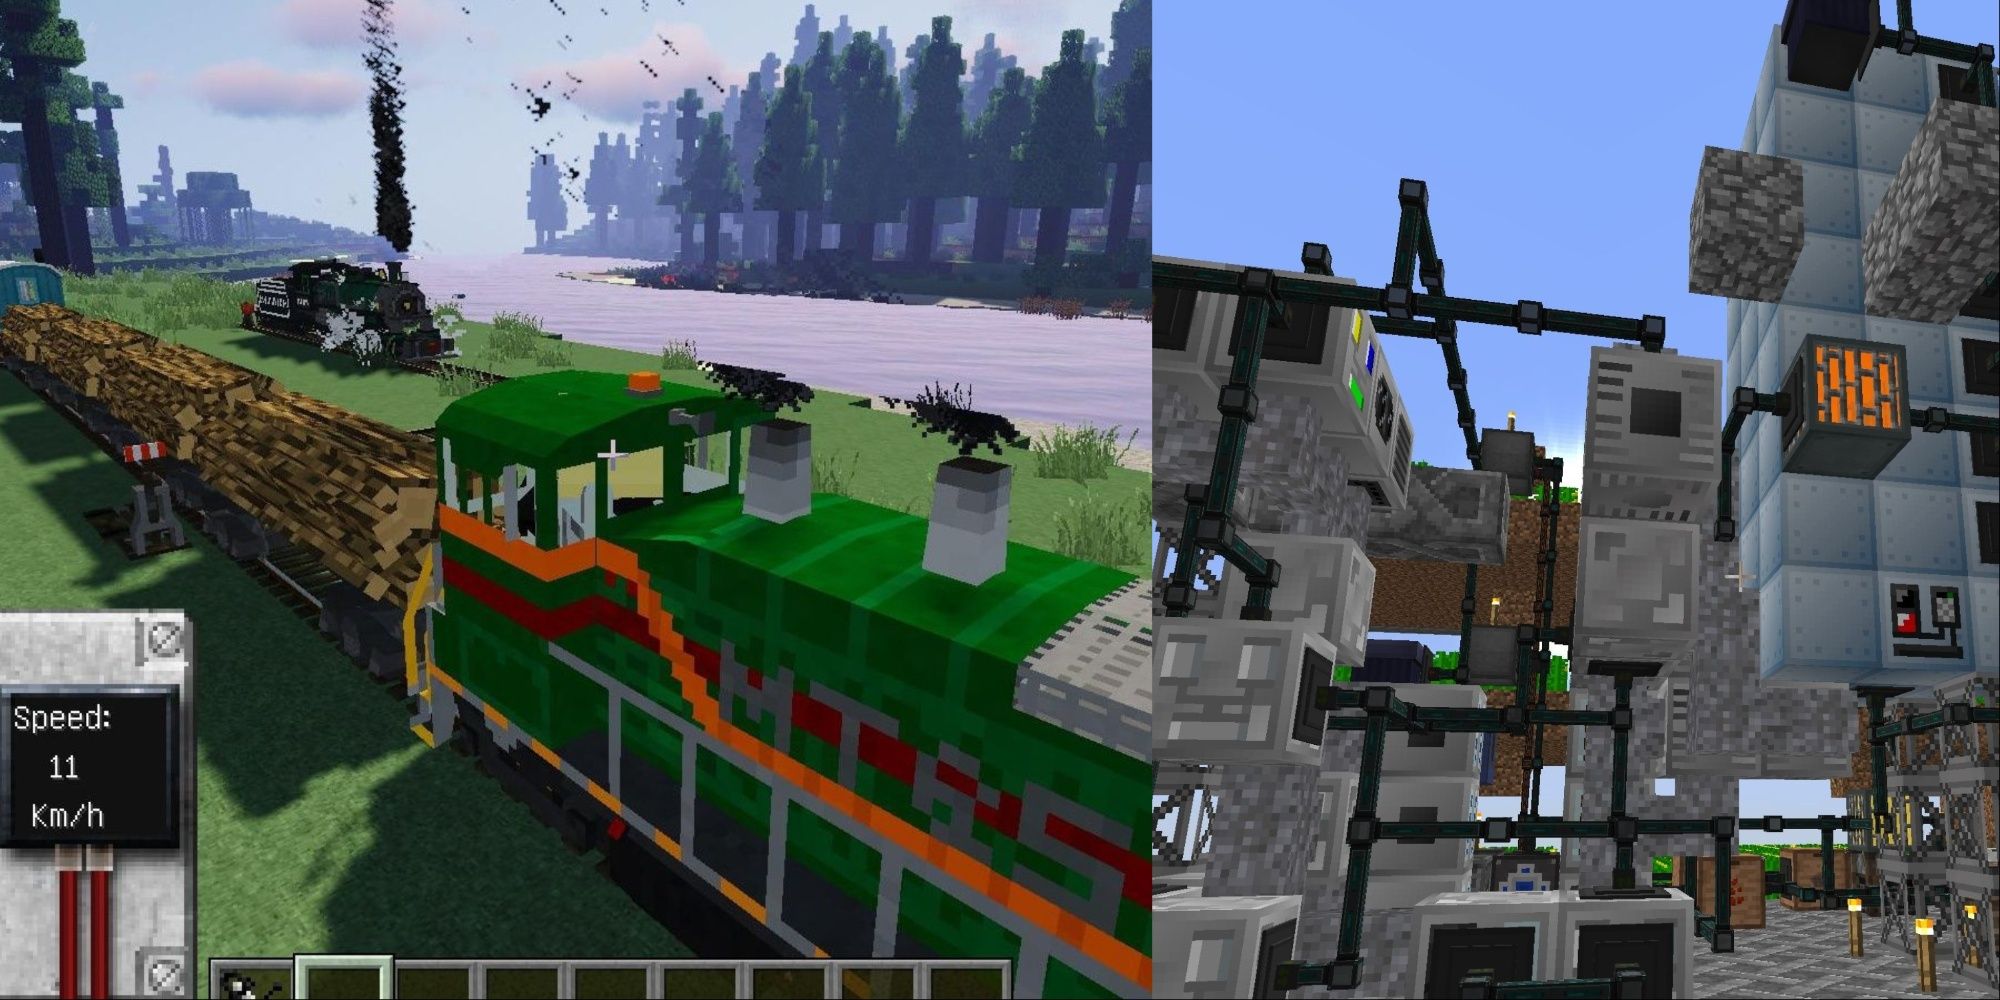 Featured Image: Minecraft Engineering Technology Mods Train Carrying Logs With Speed User Interface And Large Factory Using Gregtech.